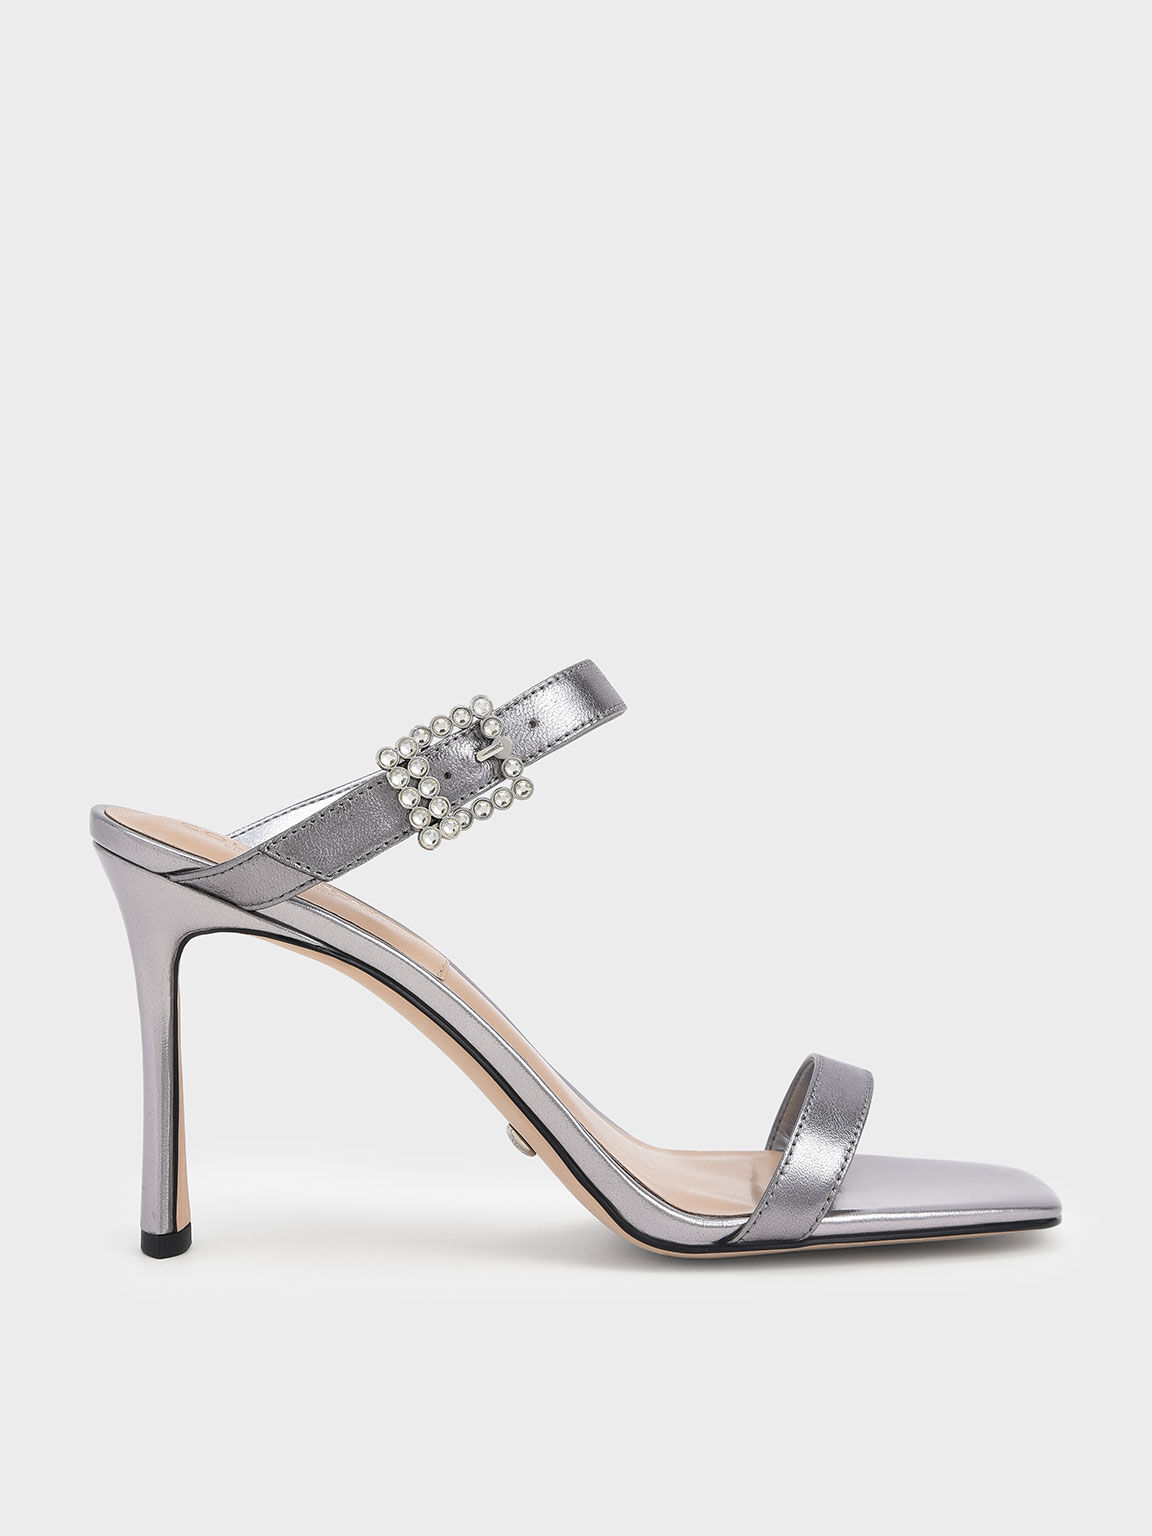 Silver Leather Gem-Embellished Stiletto Sandals - CHARLES & KEITH ID